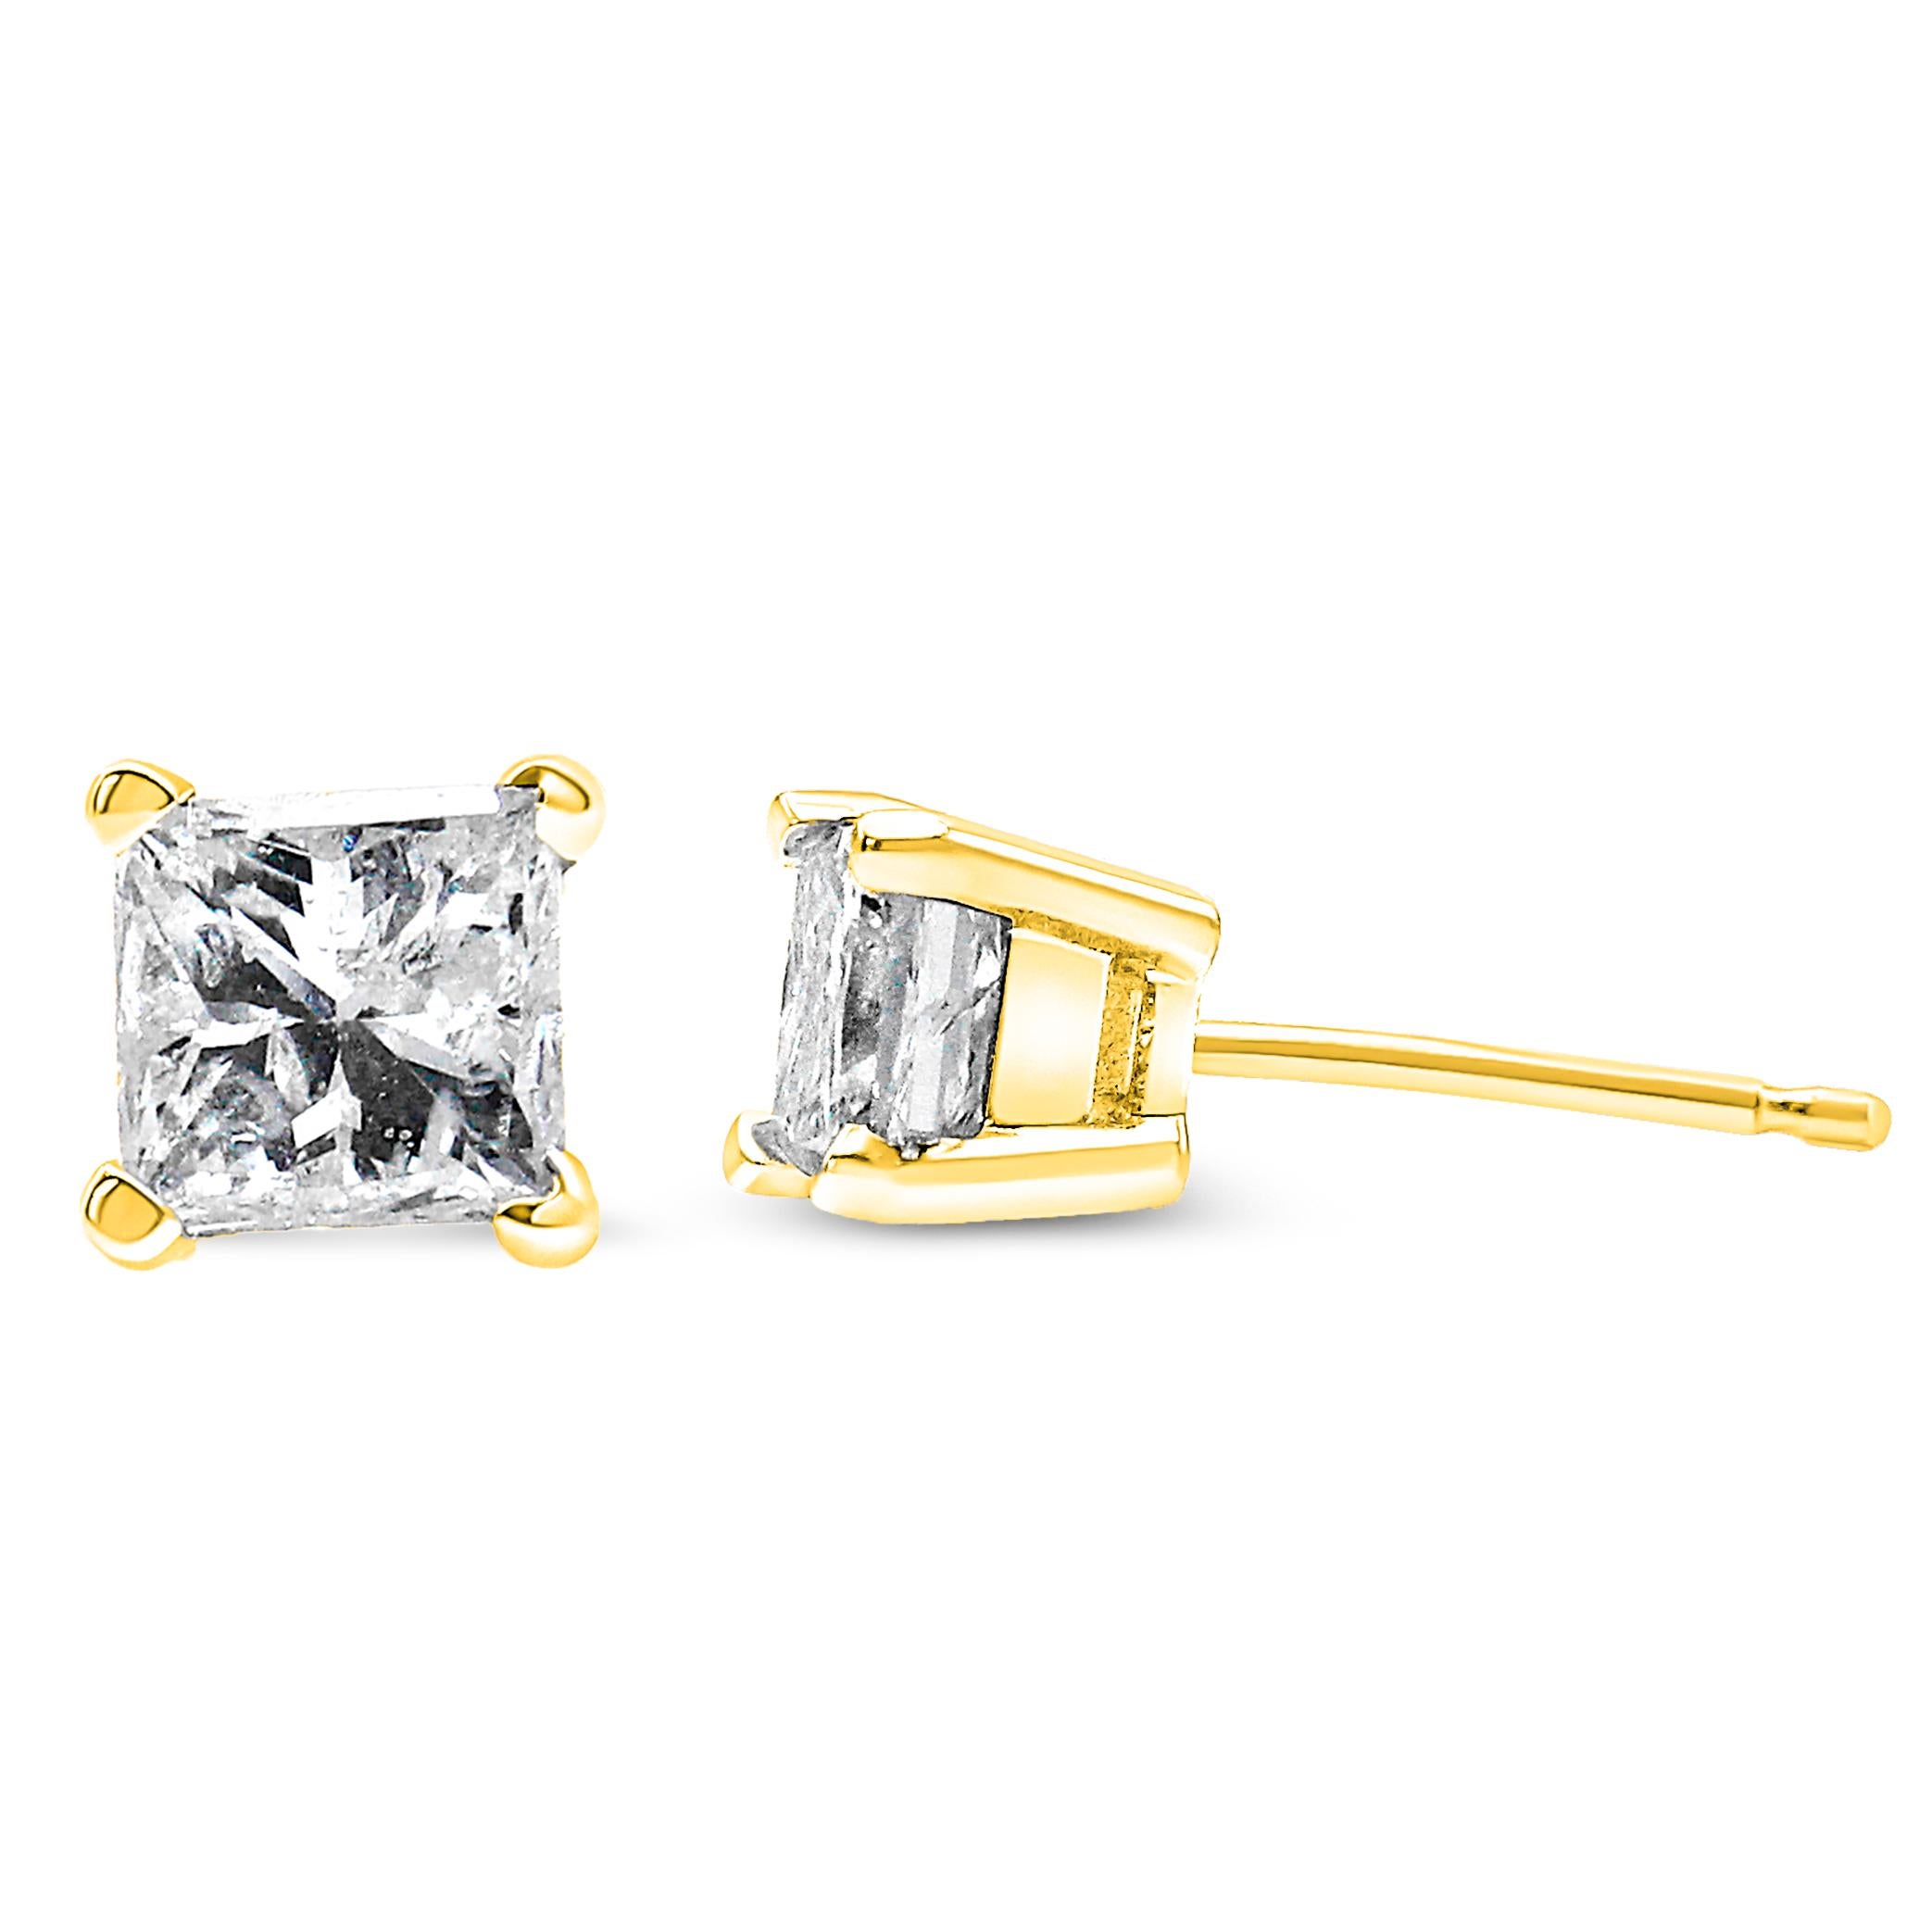 Contemporary AGS Certified 14k Yellow Gold 1/2 Carat Princess Diamond Solitaire Stud Earrings